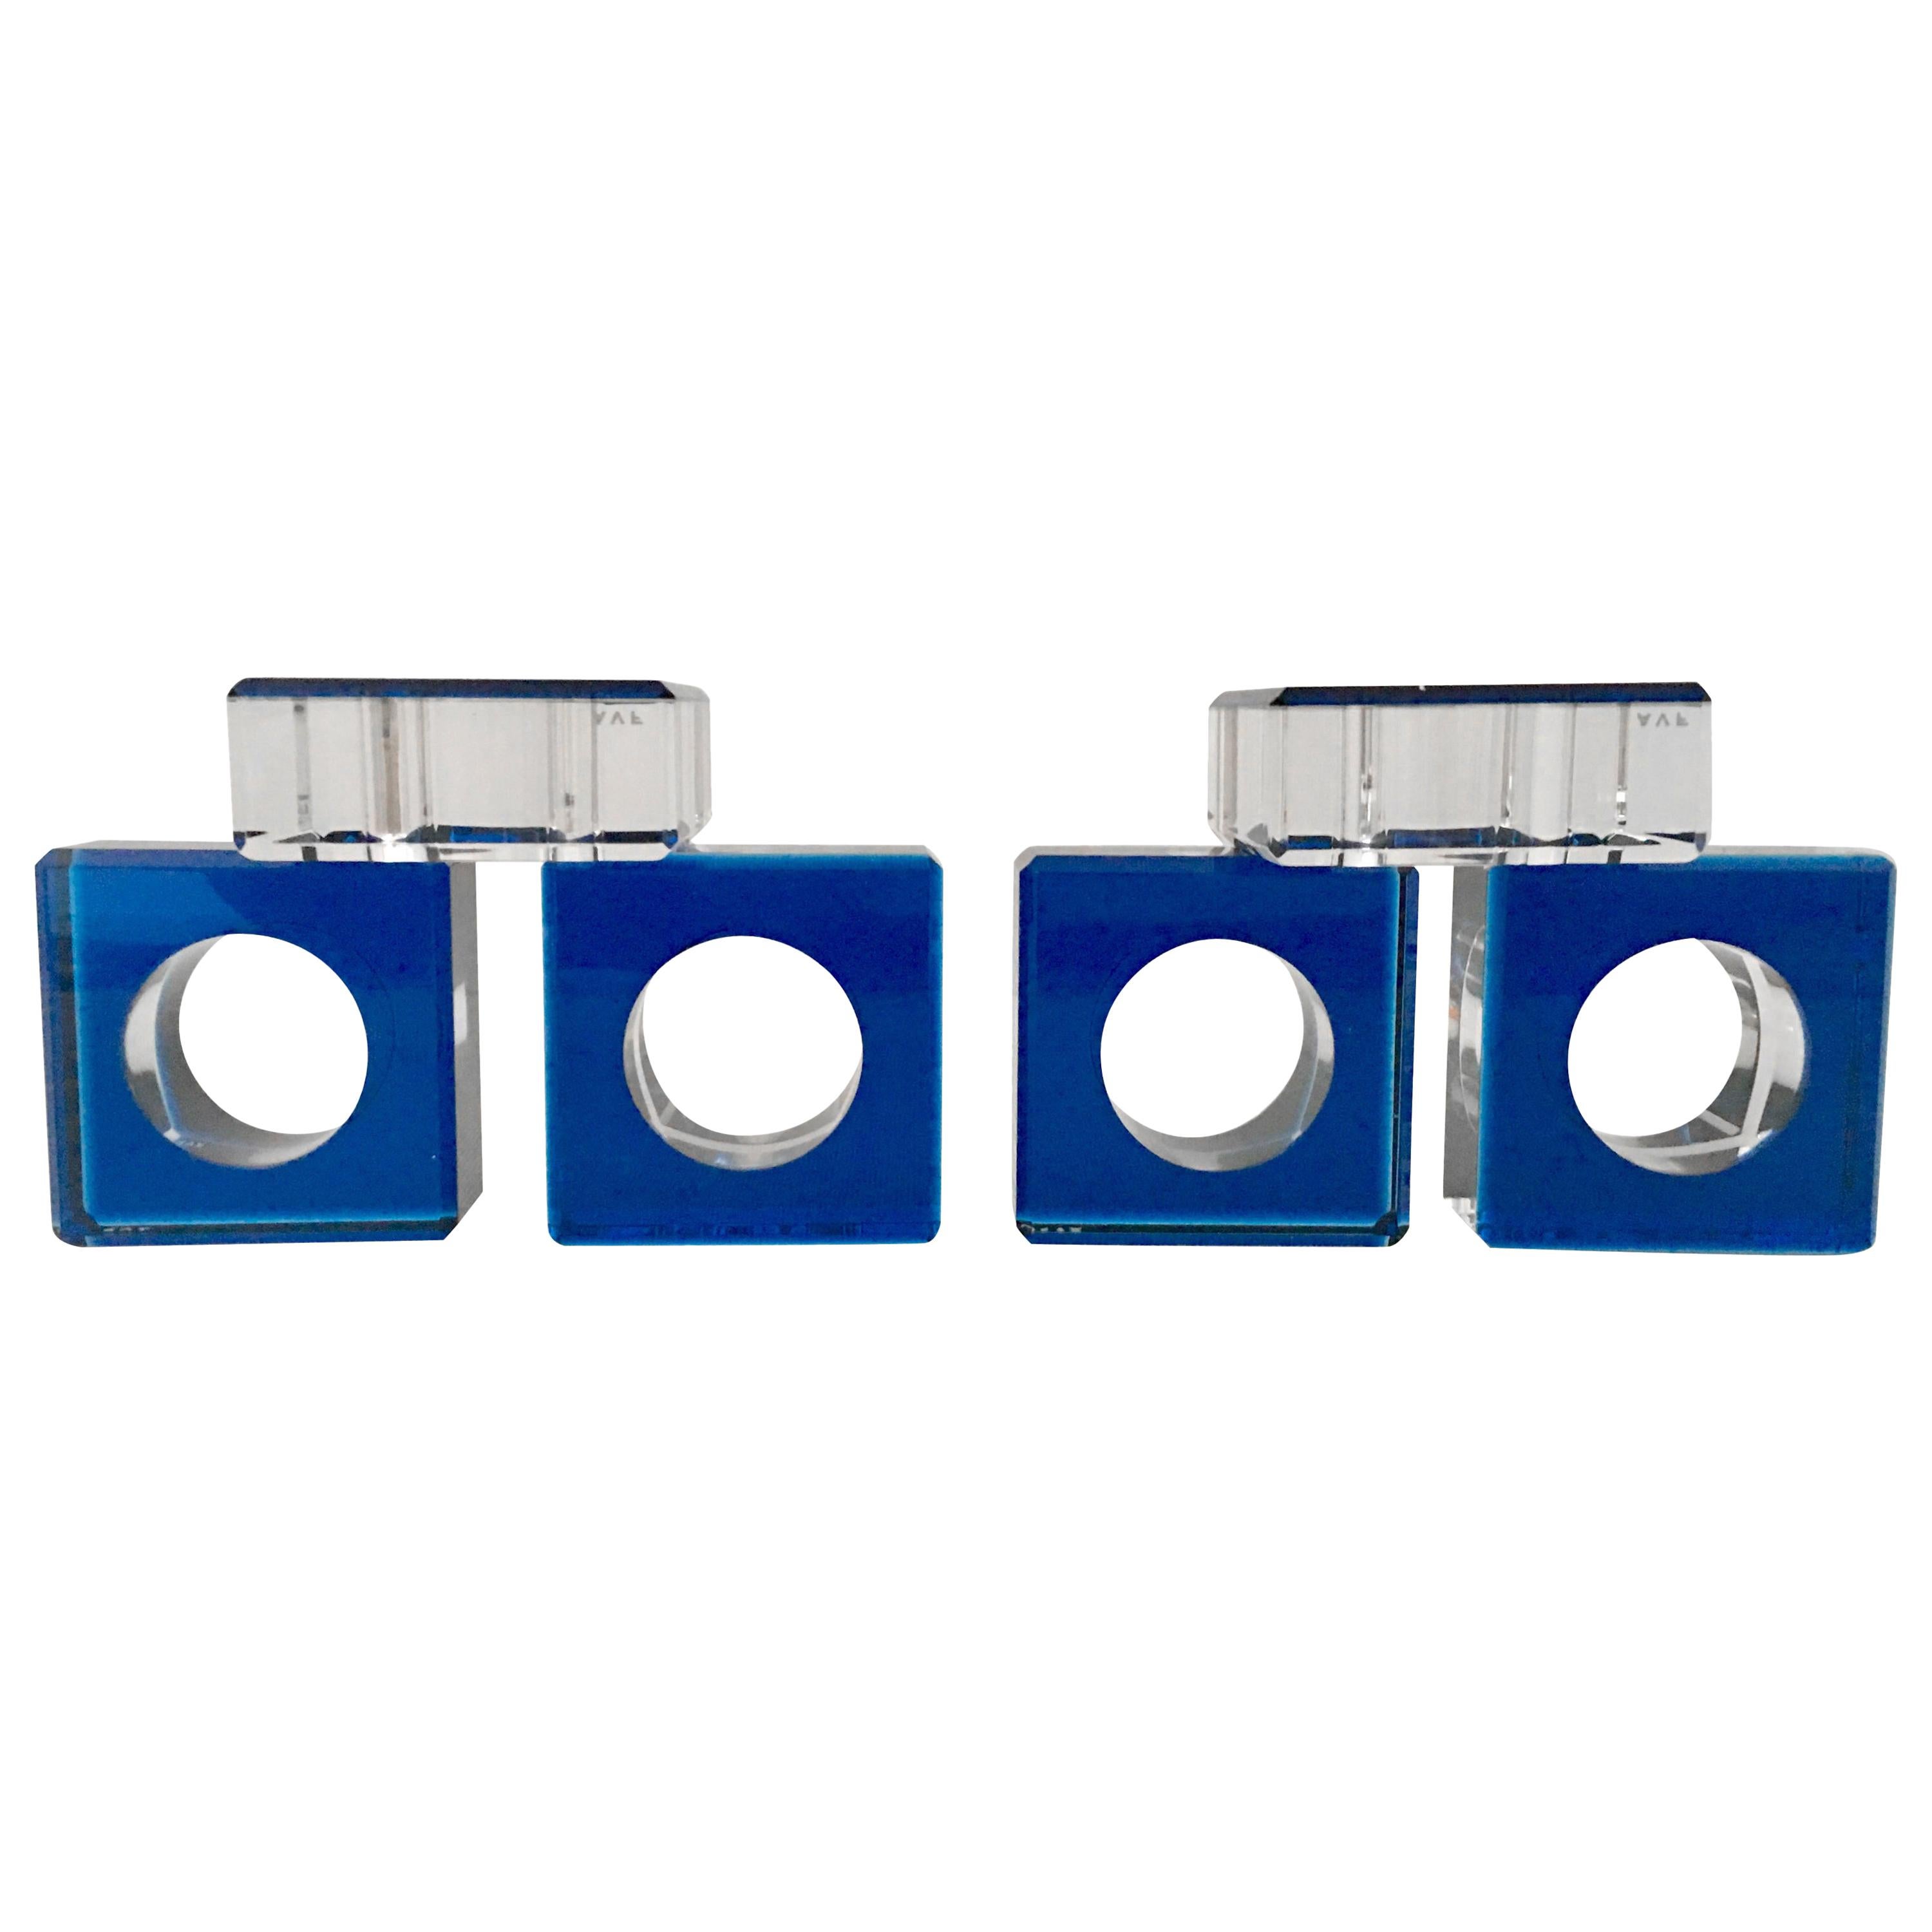 Contemporary Square and Round Lucite Napkin Rings S/6 by, "AFV"